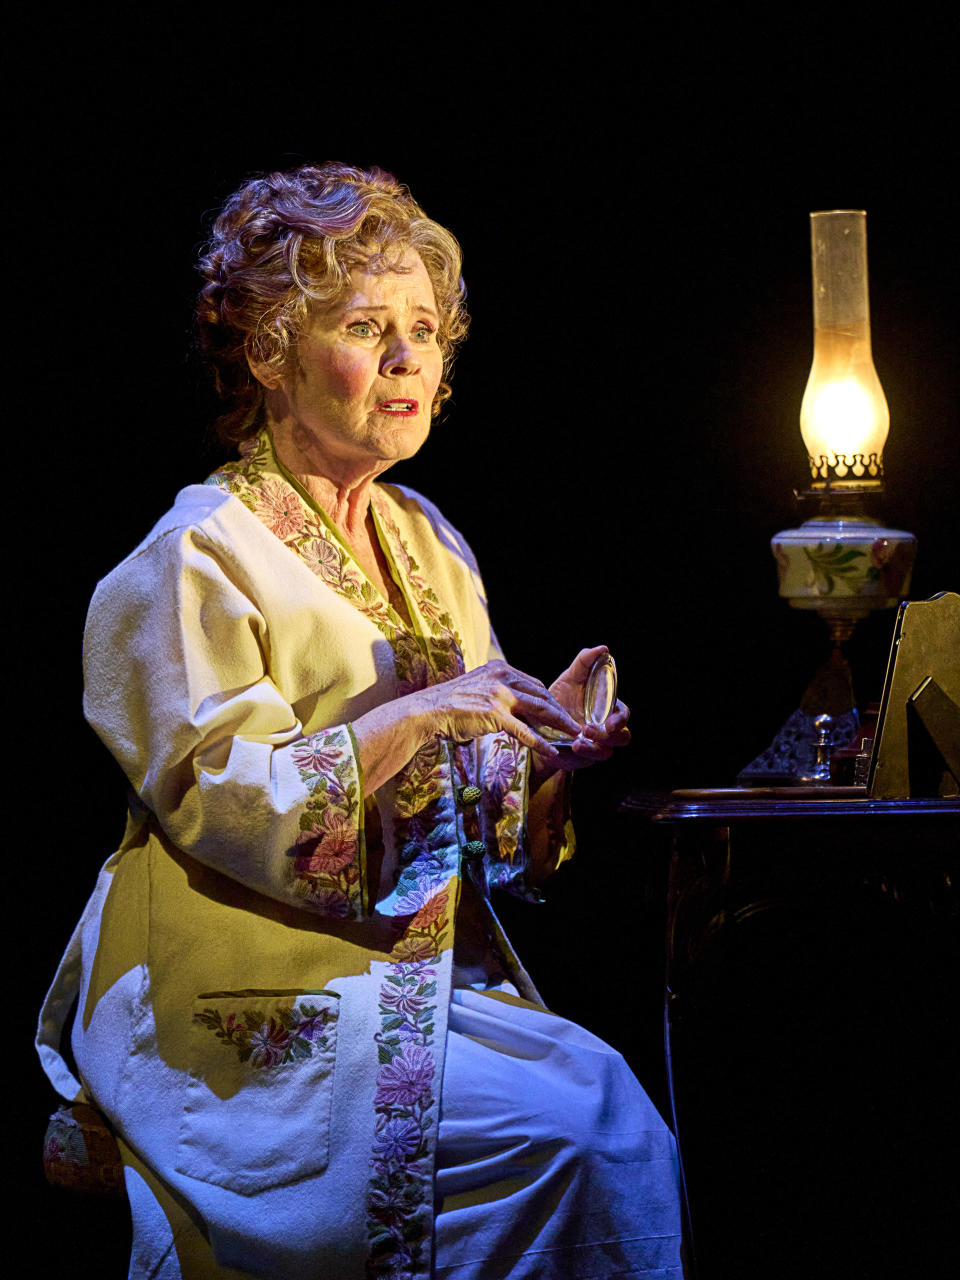 Imelda Staunton during a poignant moment in ‘Hello, Dolly!’